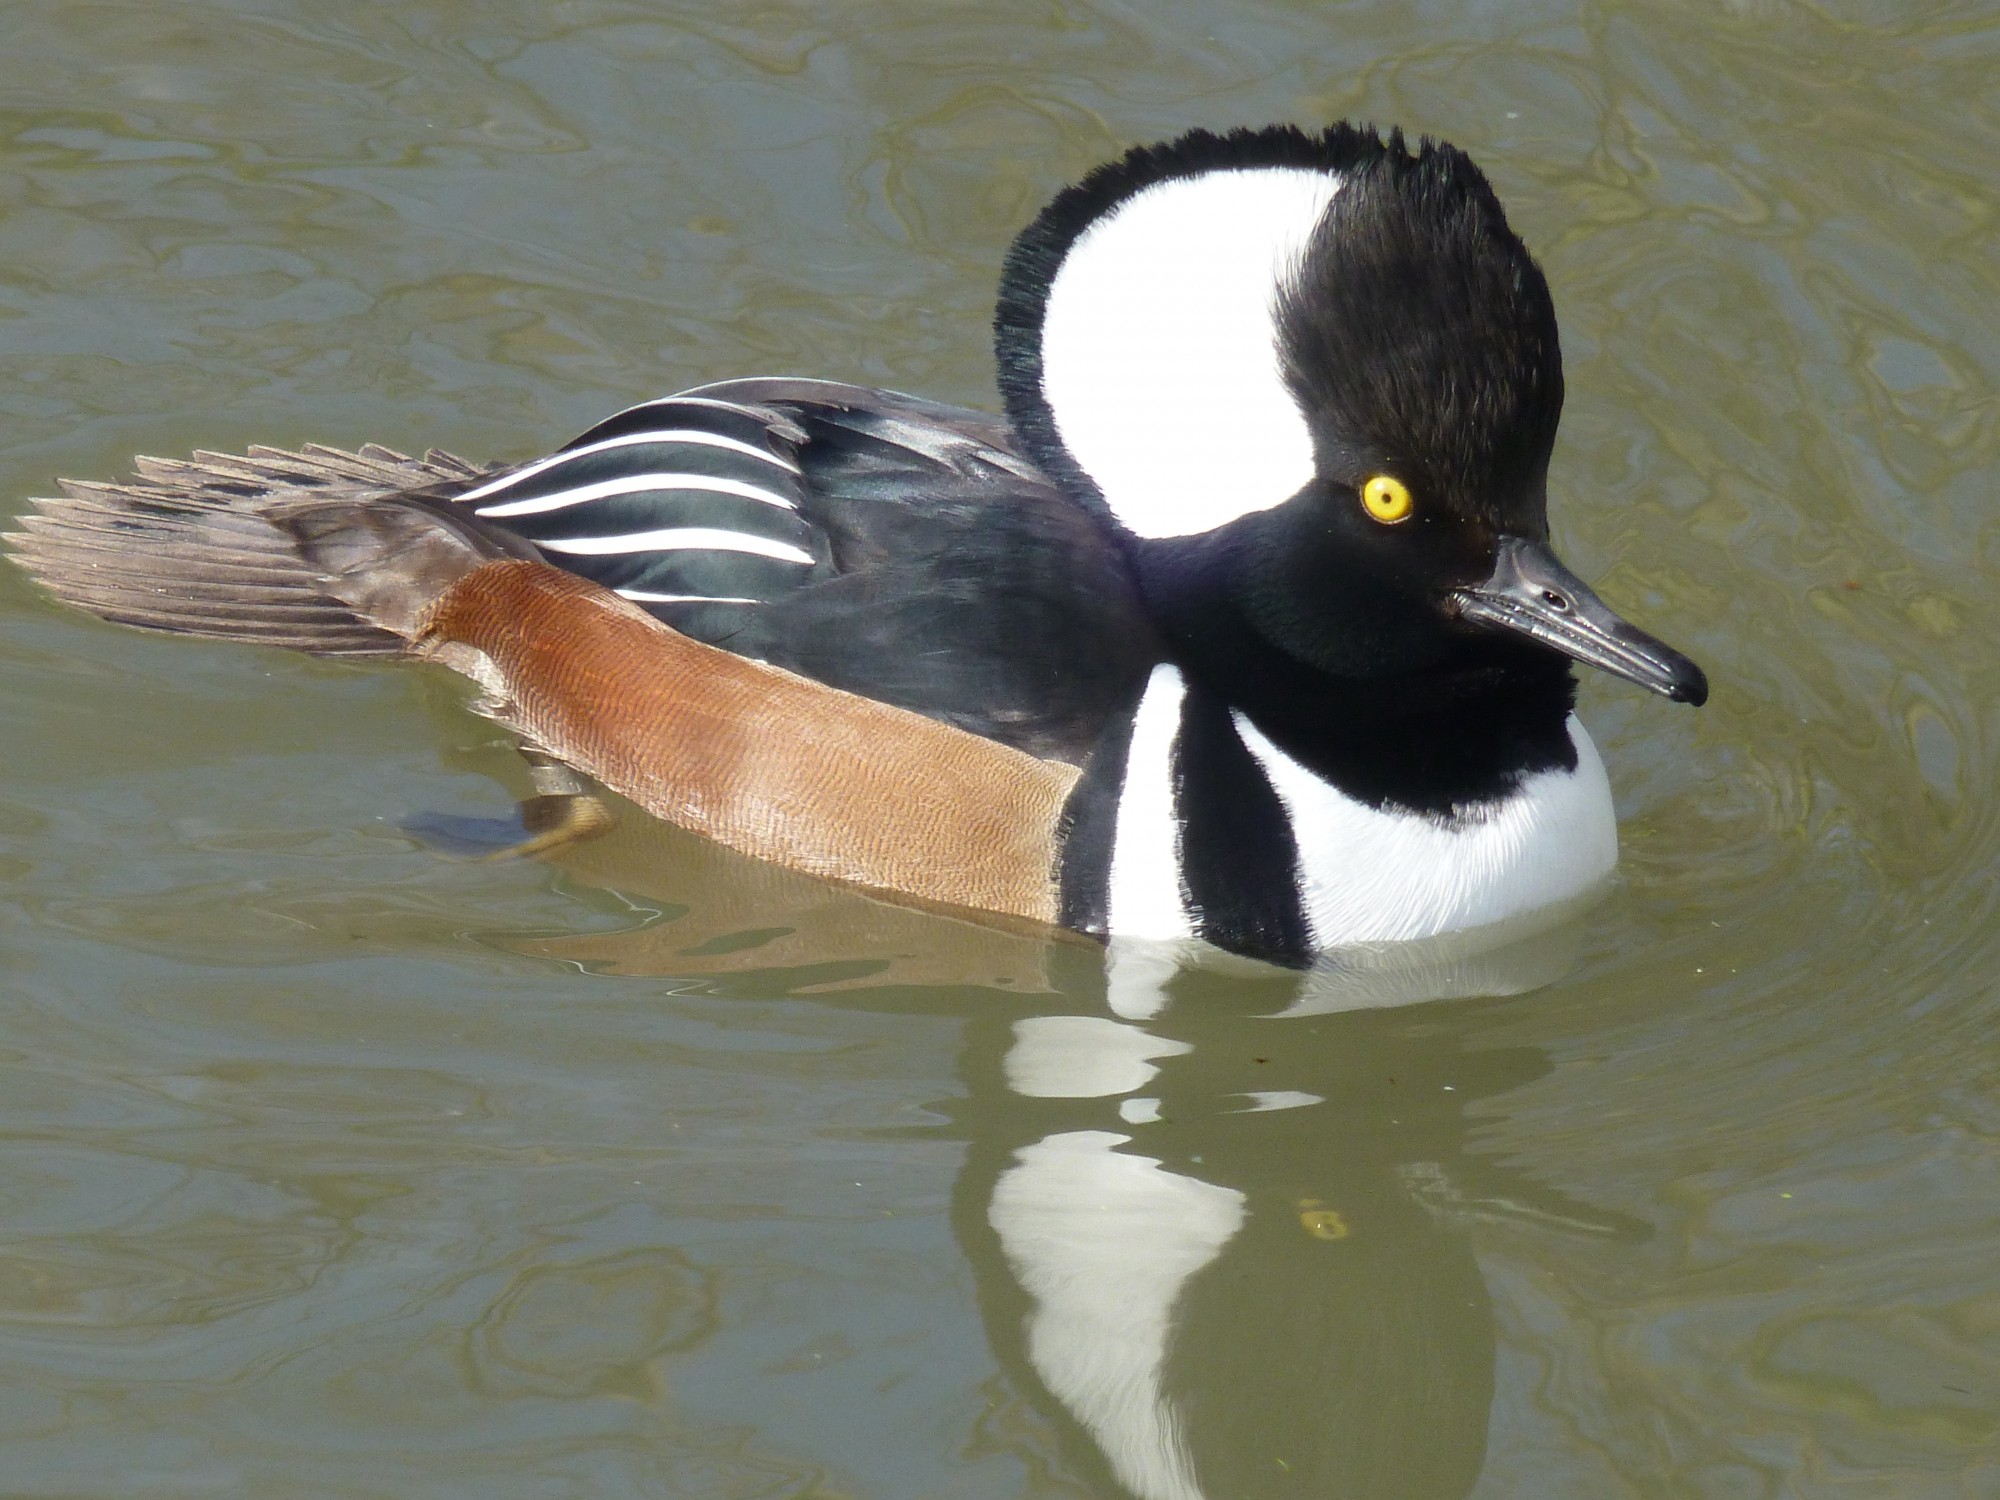 The colours on this drake hooded merganser tell us that birds must see in colour. Otherwise it is wasted effort. Species of birds, like this duck and like the flamingos, that use colour to attract a mate will have very good colour vision to detect the best quality partner.